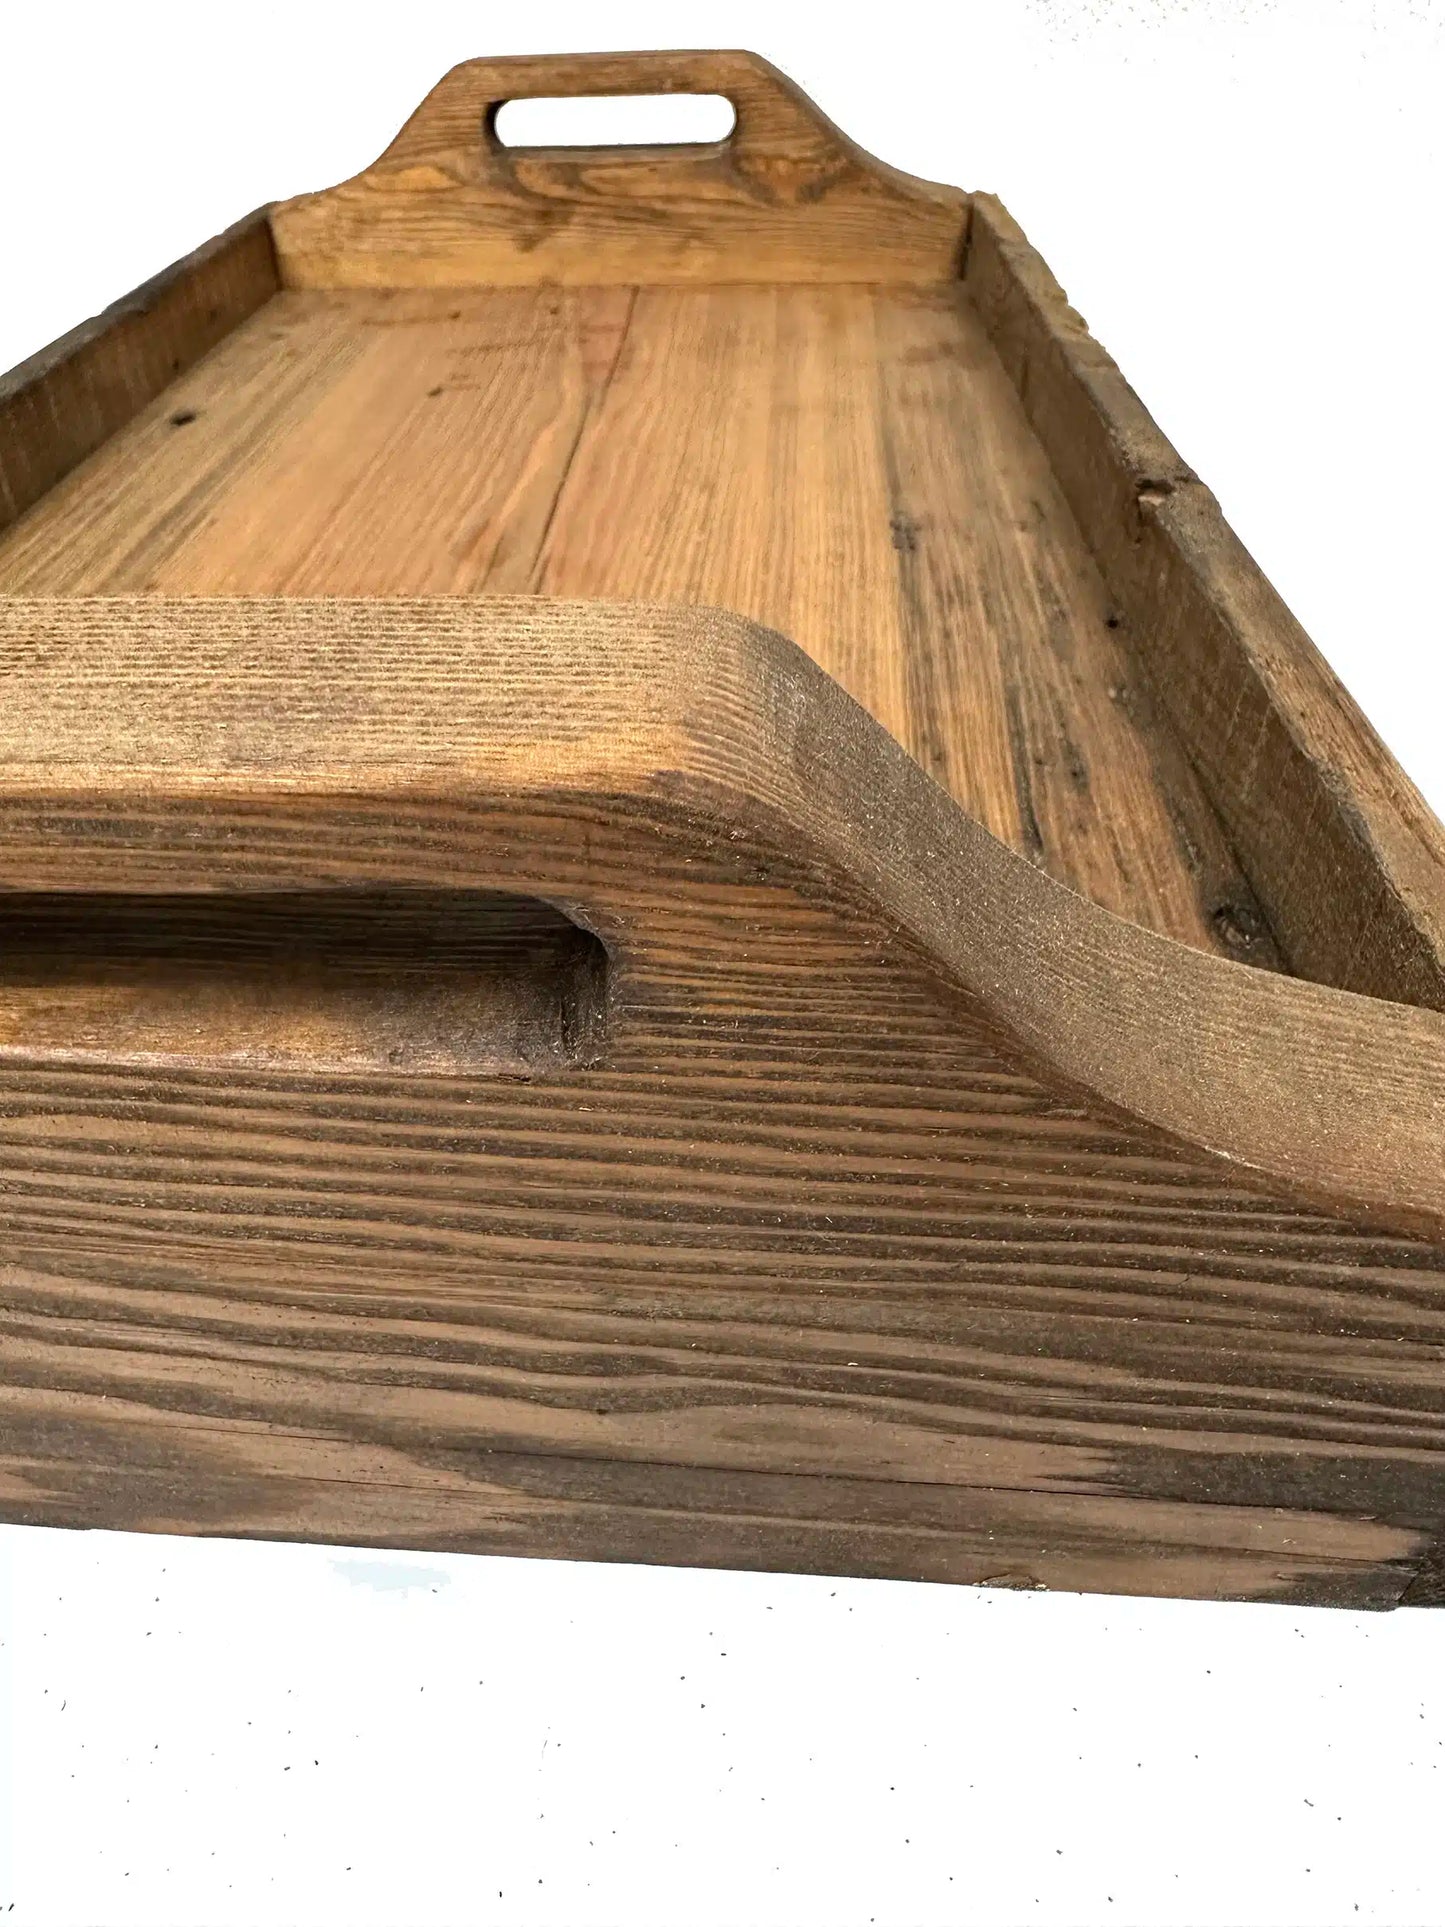 wood serving tray shown from one end. In view is a close up of the handle and grain patterns displayed in the wood.